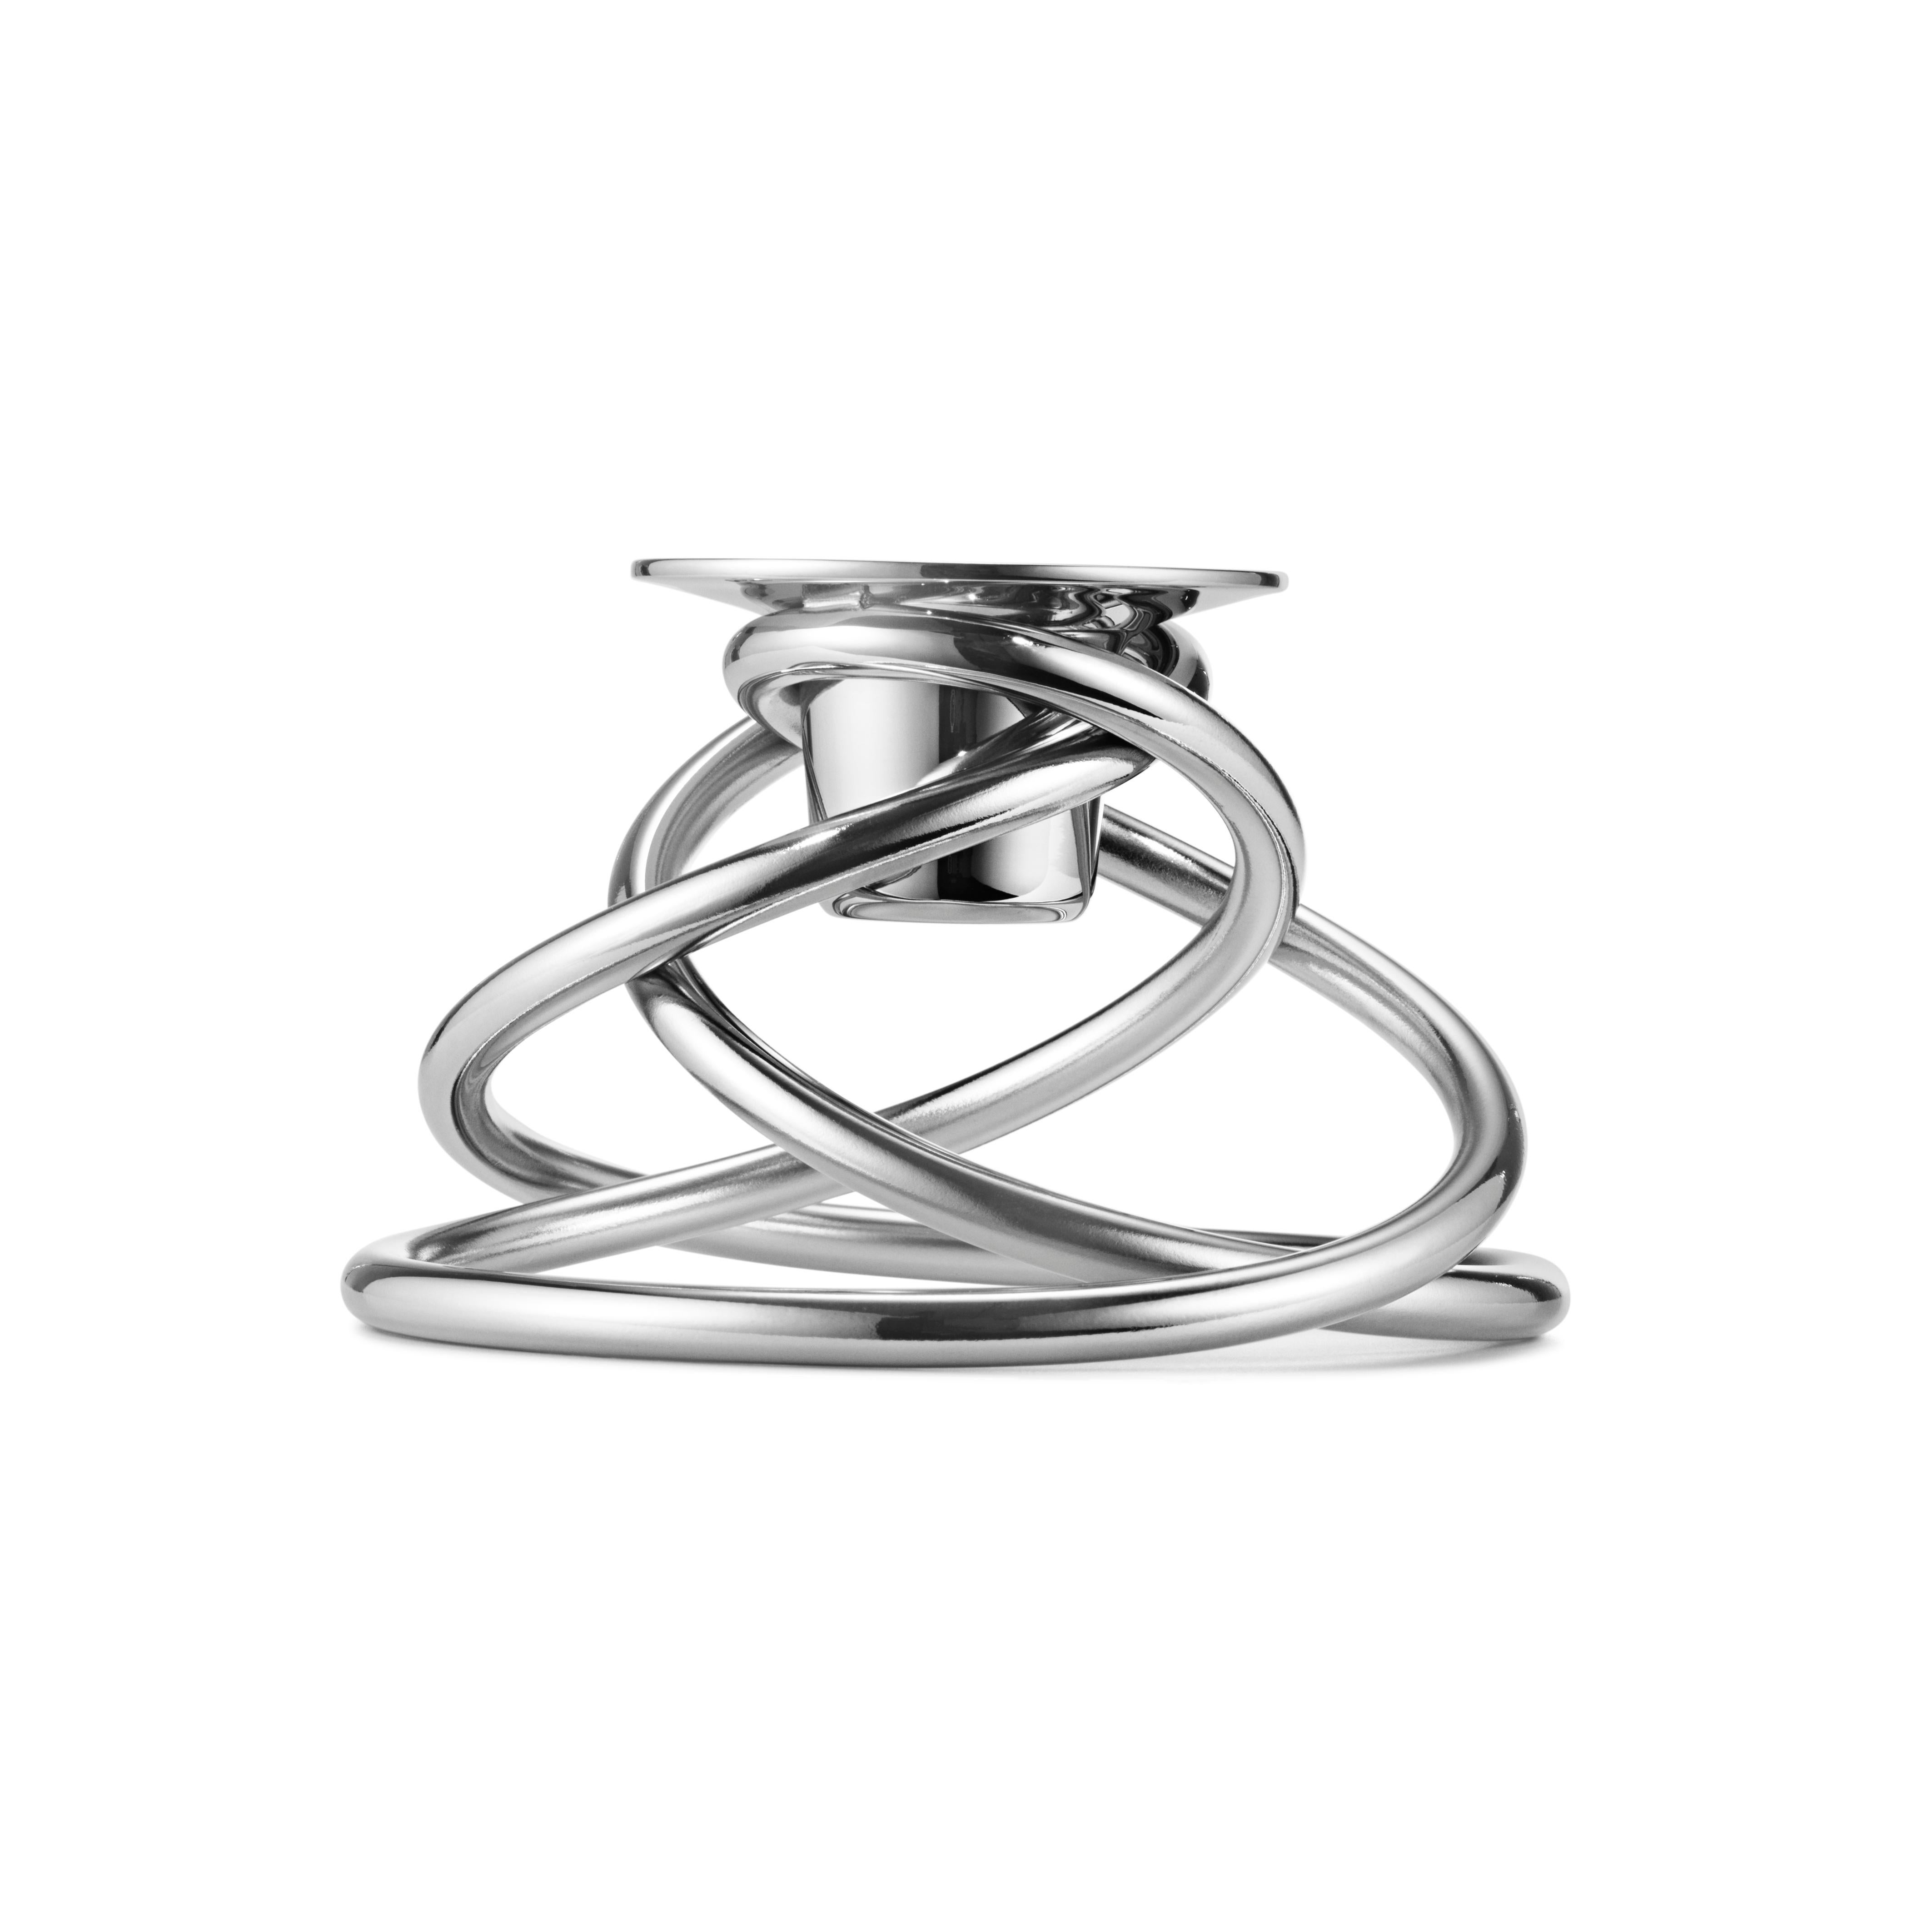 The iconic lines and timeless expression of the Manhattan collection represent the essence of the Georg Jensen DNA and acts as a perfect contrast to the many organic designs. Originally a bar collection inspired by the Art Deco movement and the era